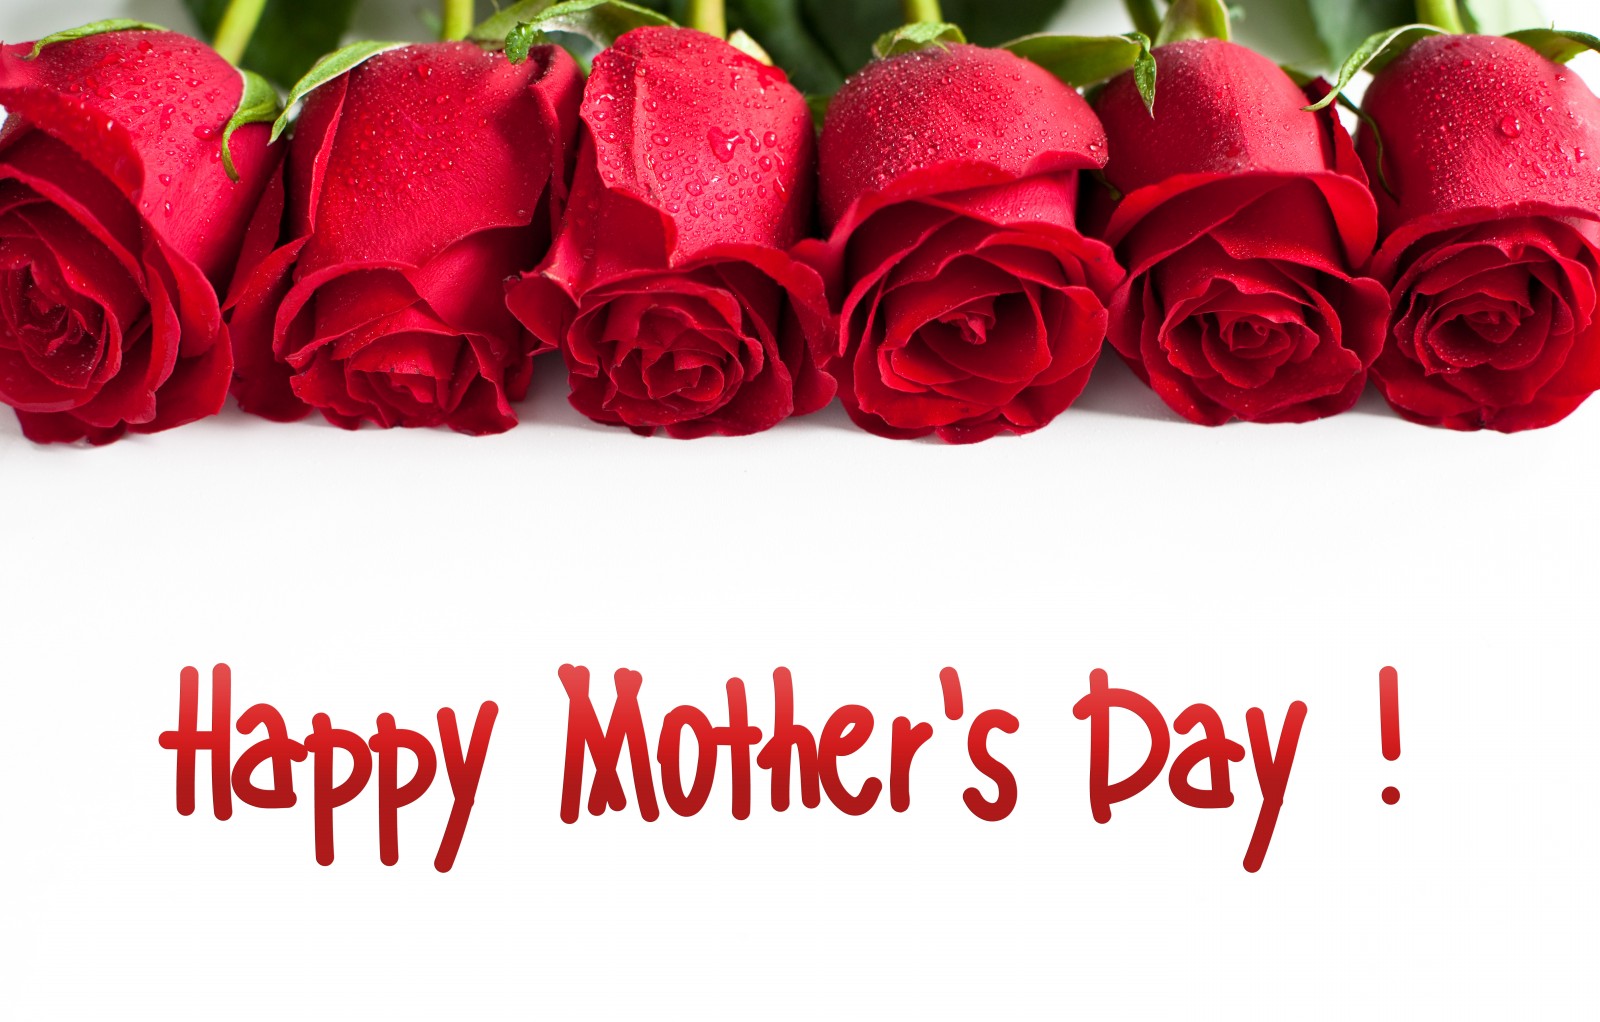 Free download Happy Mothers Day images for WhatsApp Wish Mothers ...